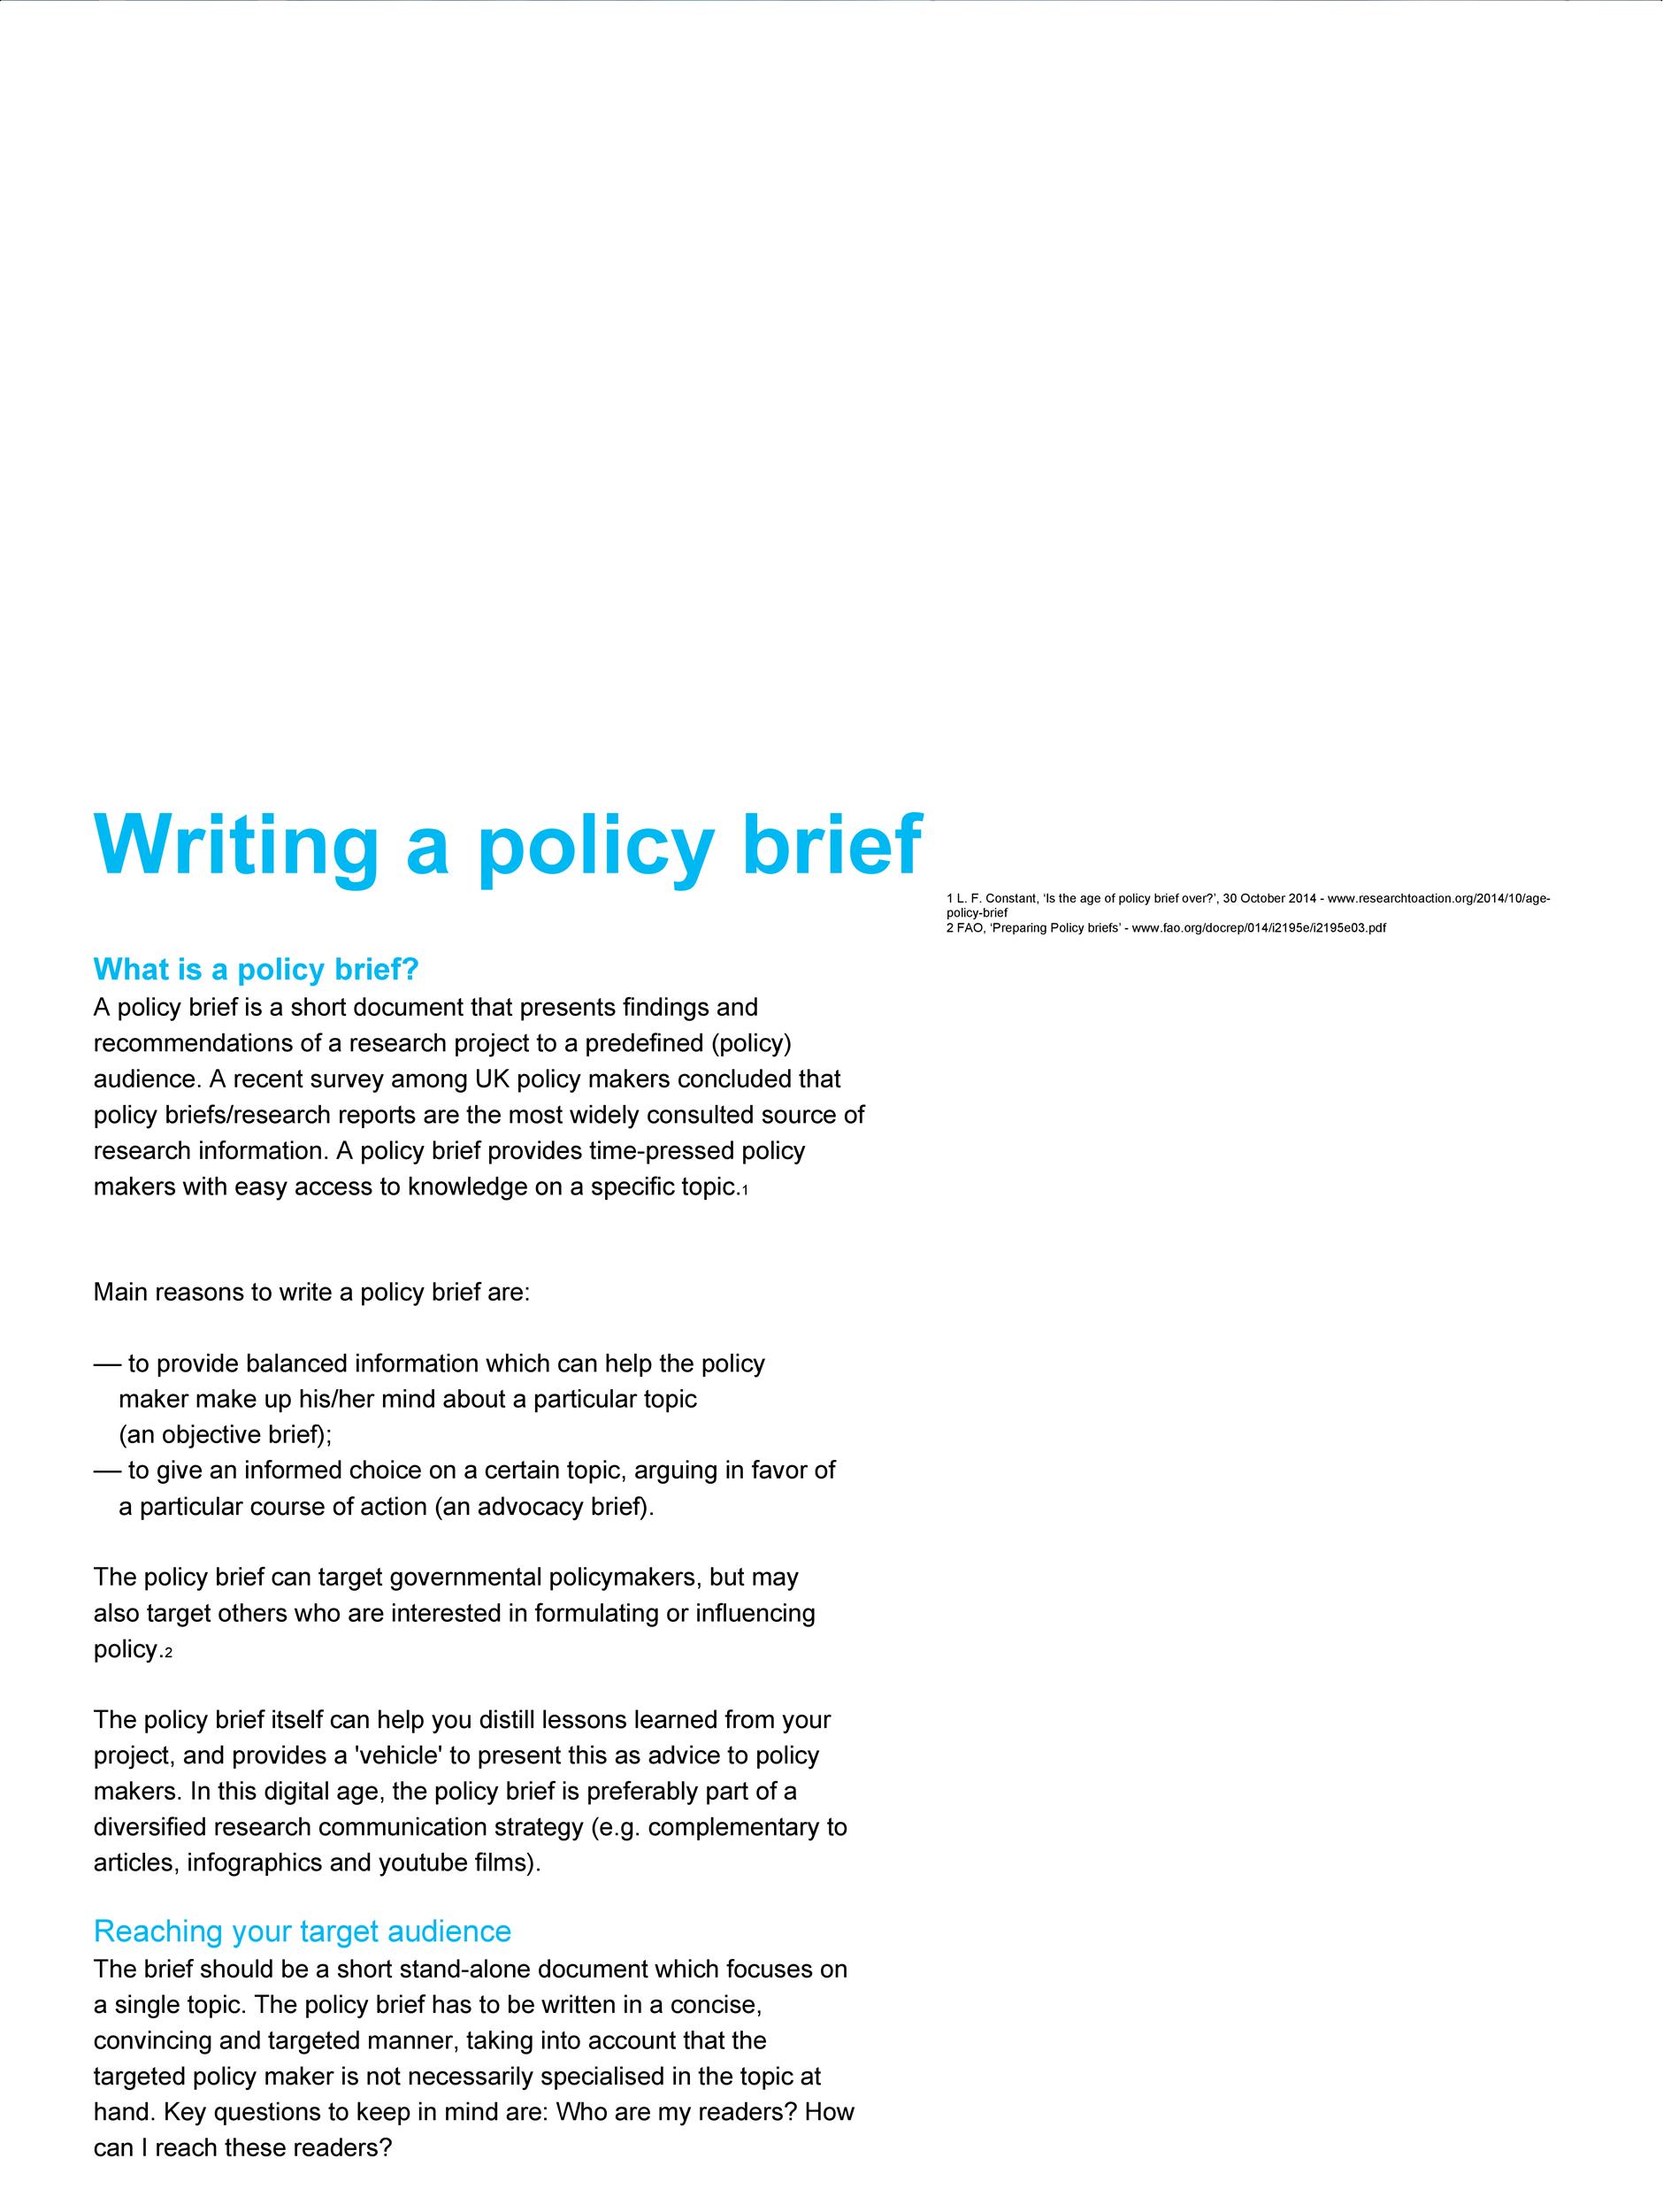 25 Free Policy Brief Templates (MS Word) ᐅ TemplateLab